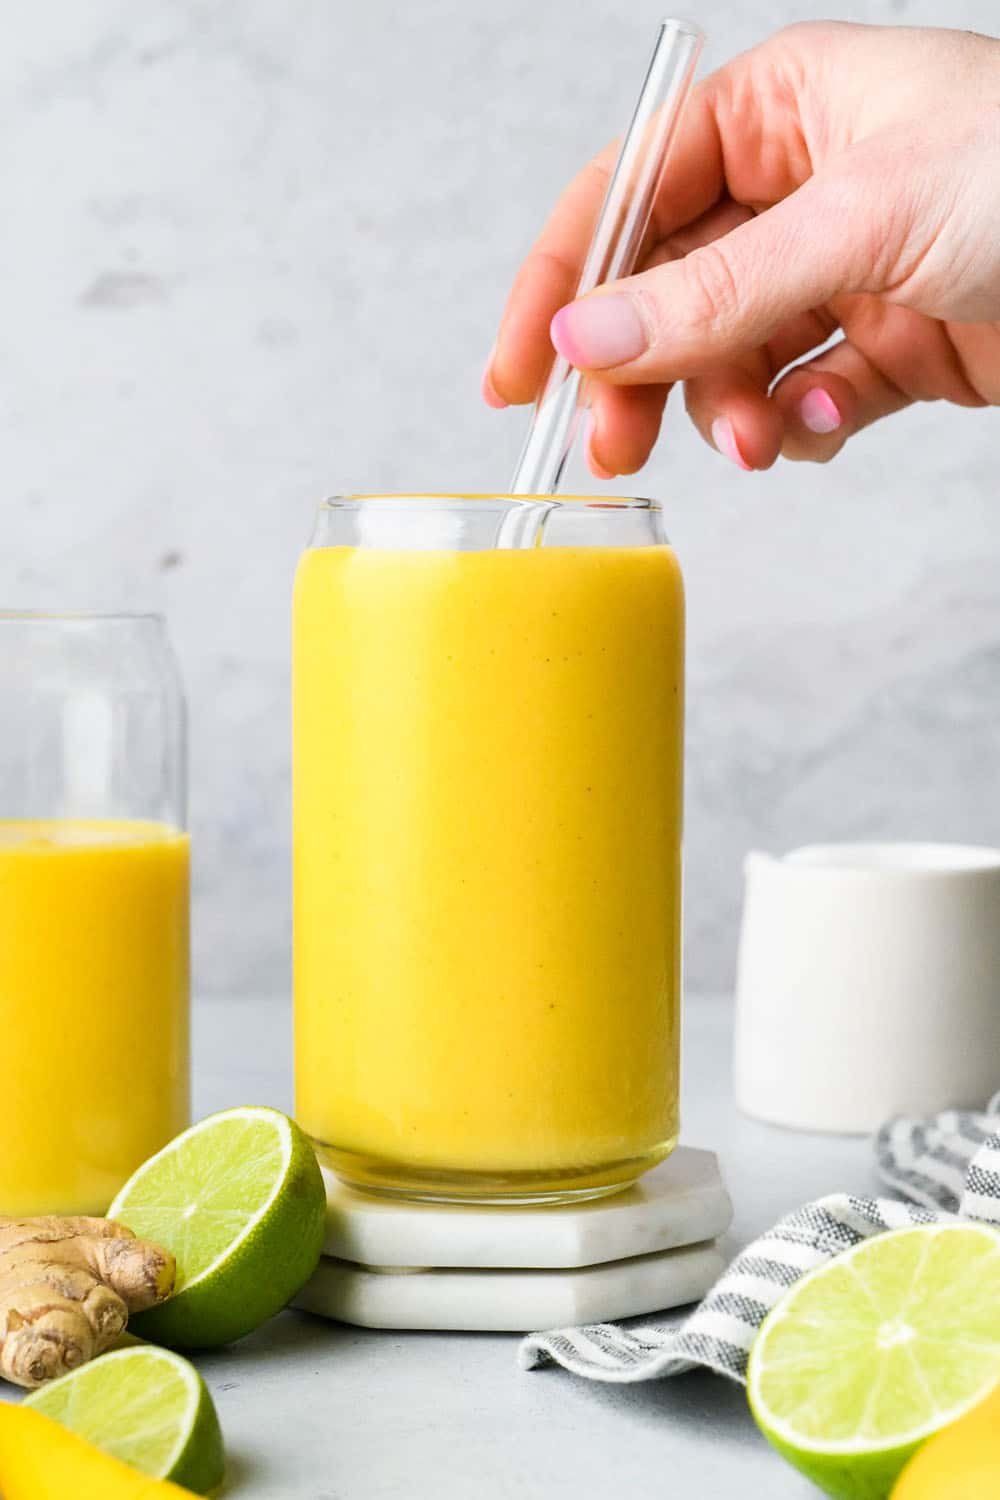 A hand placing a glass straw in a glass cup filled with vibrant yellow mango turmeric smoothie.